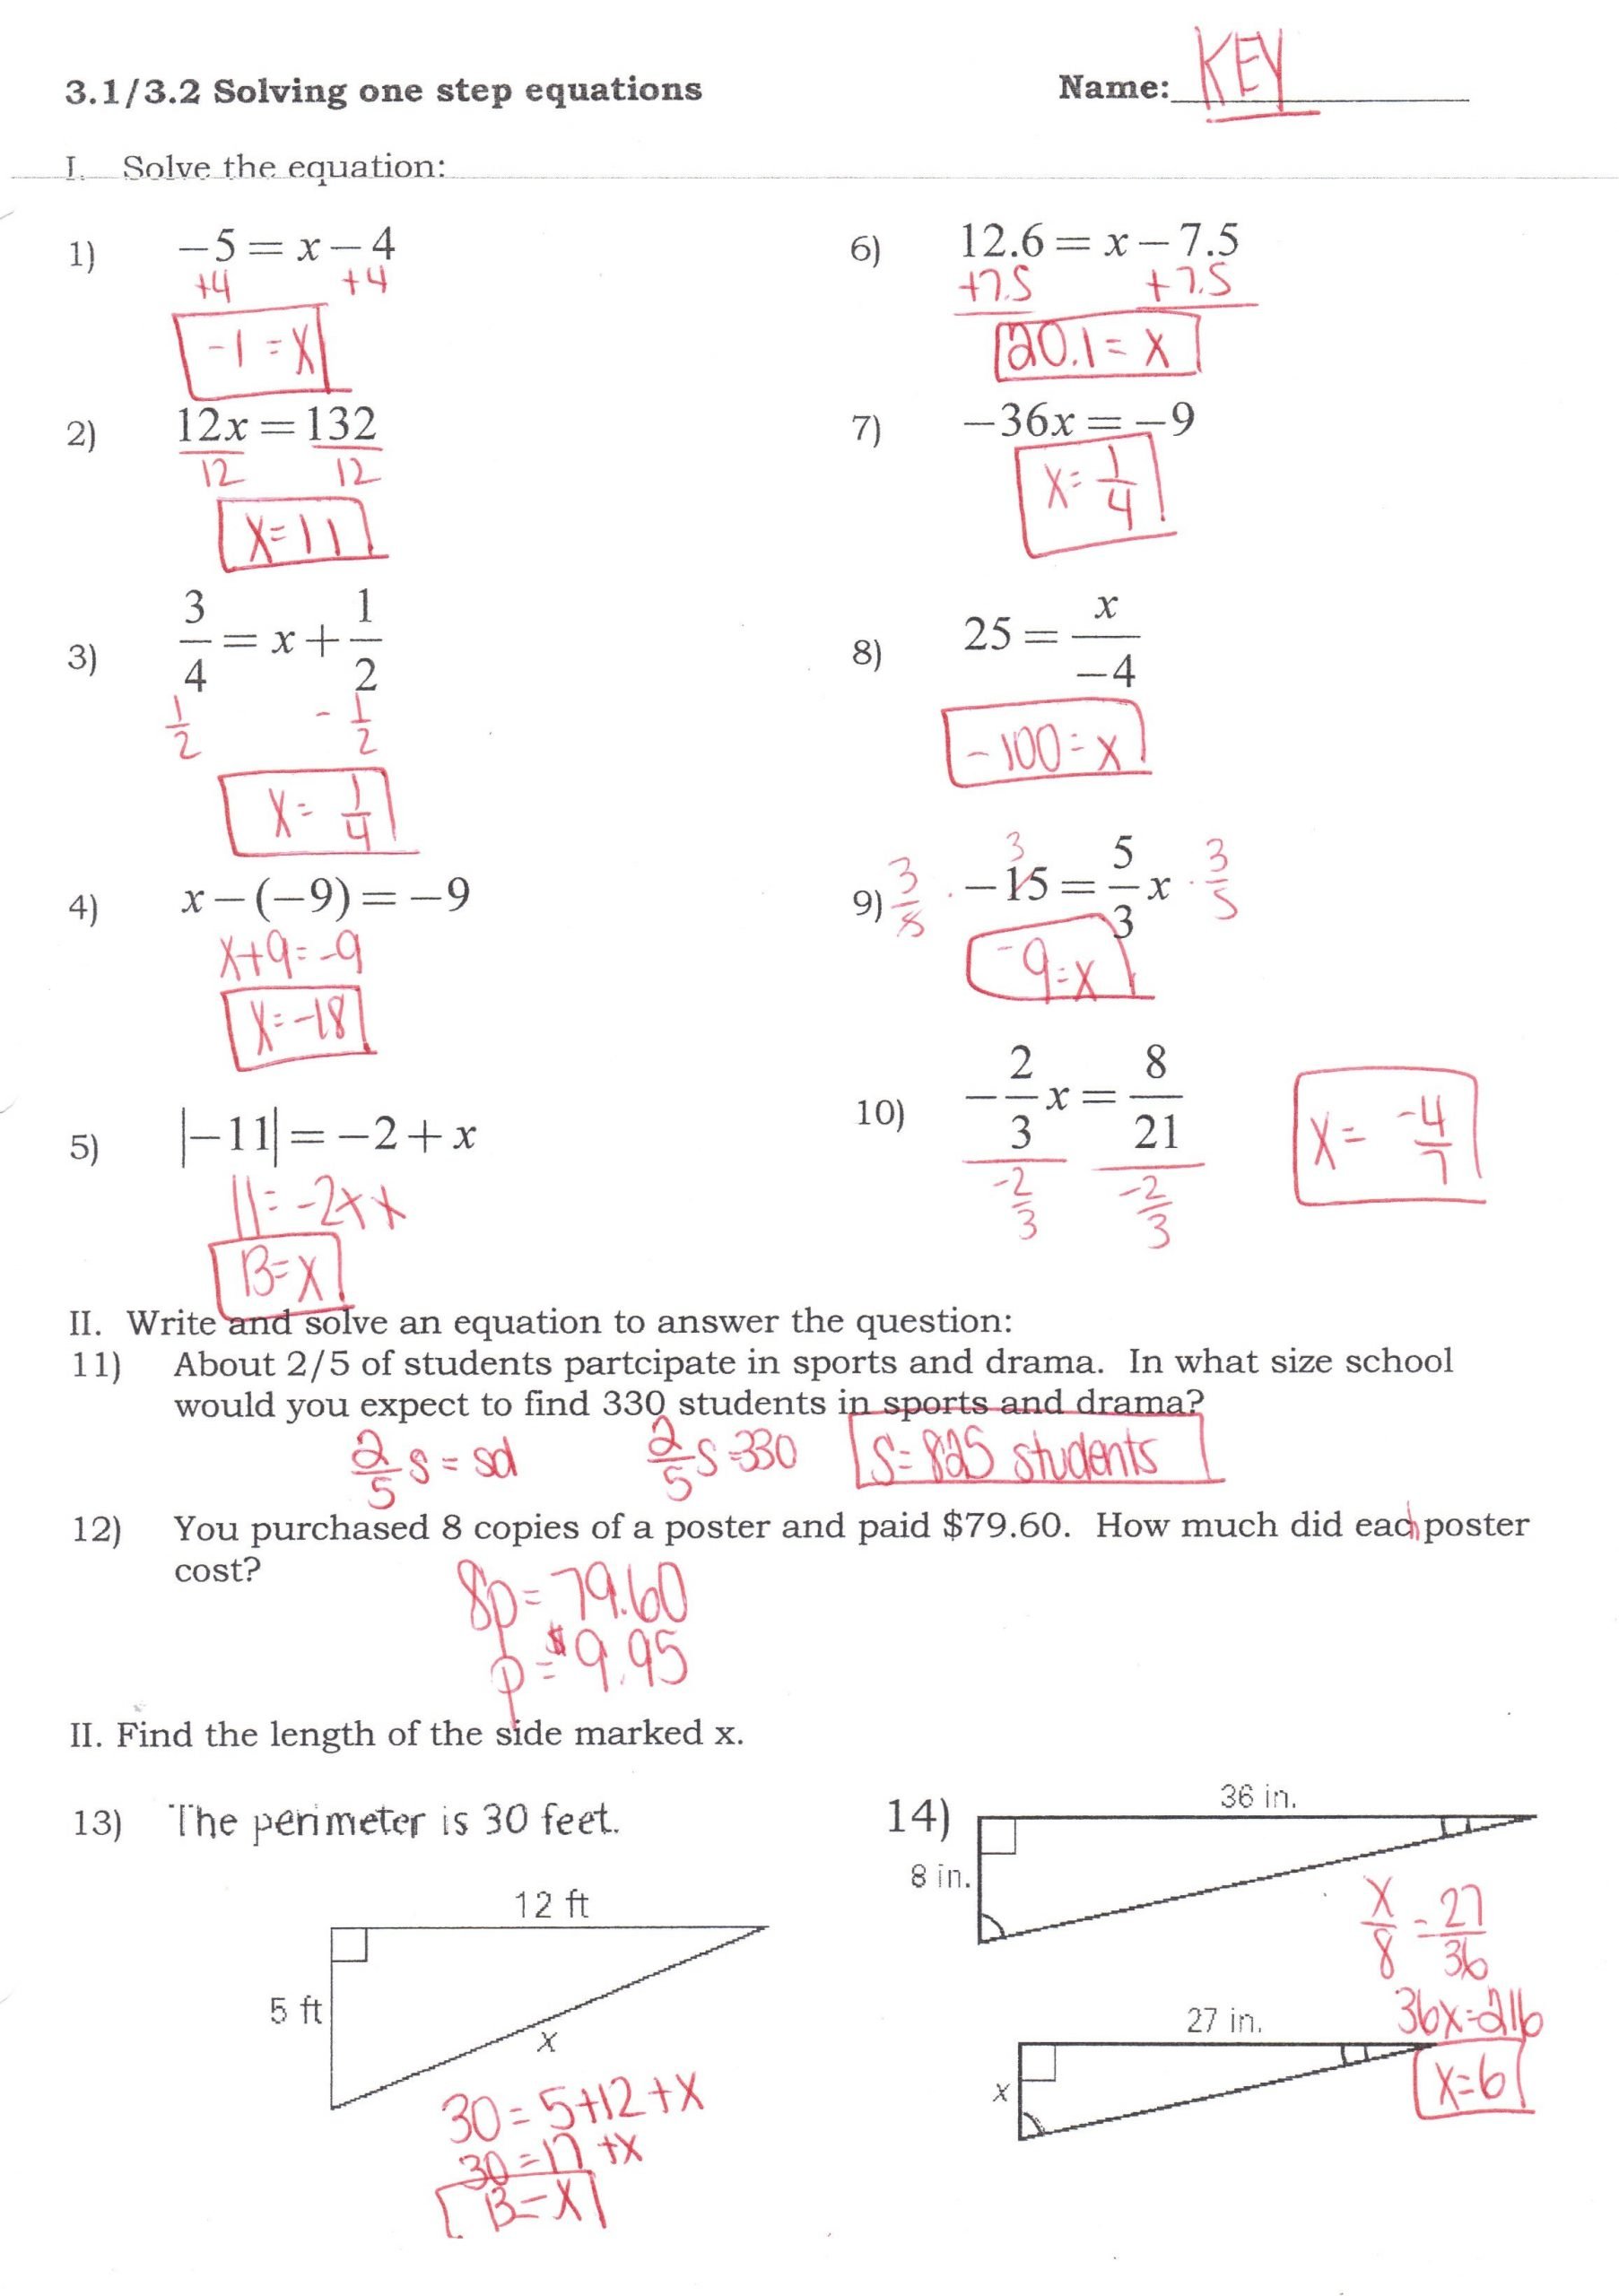 Solving Systems Of Equations by Substitution Worksheet ...